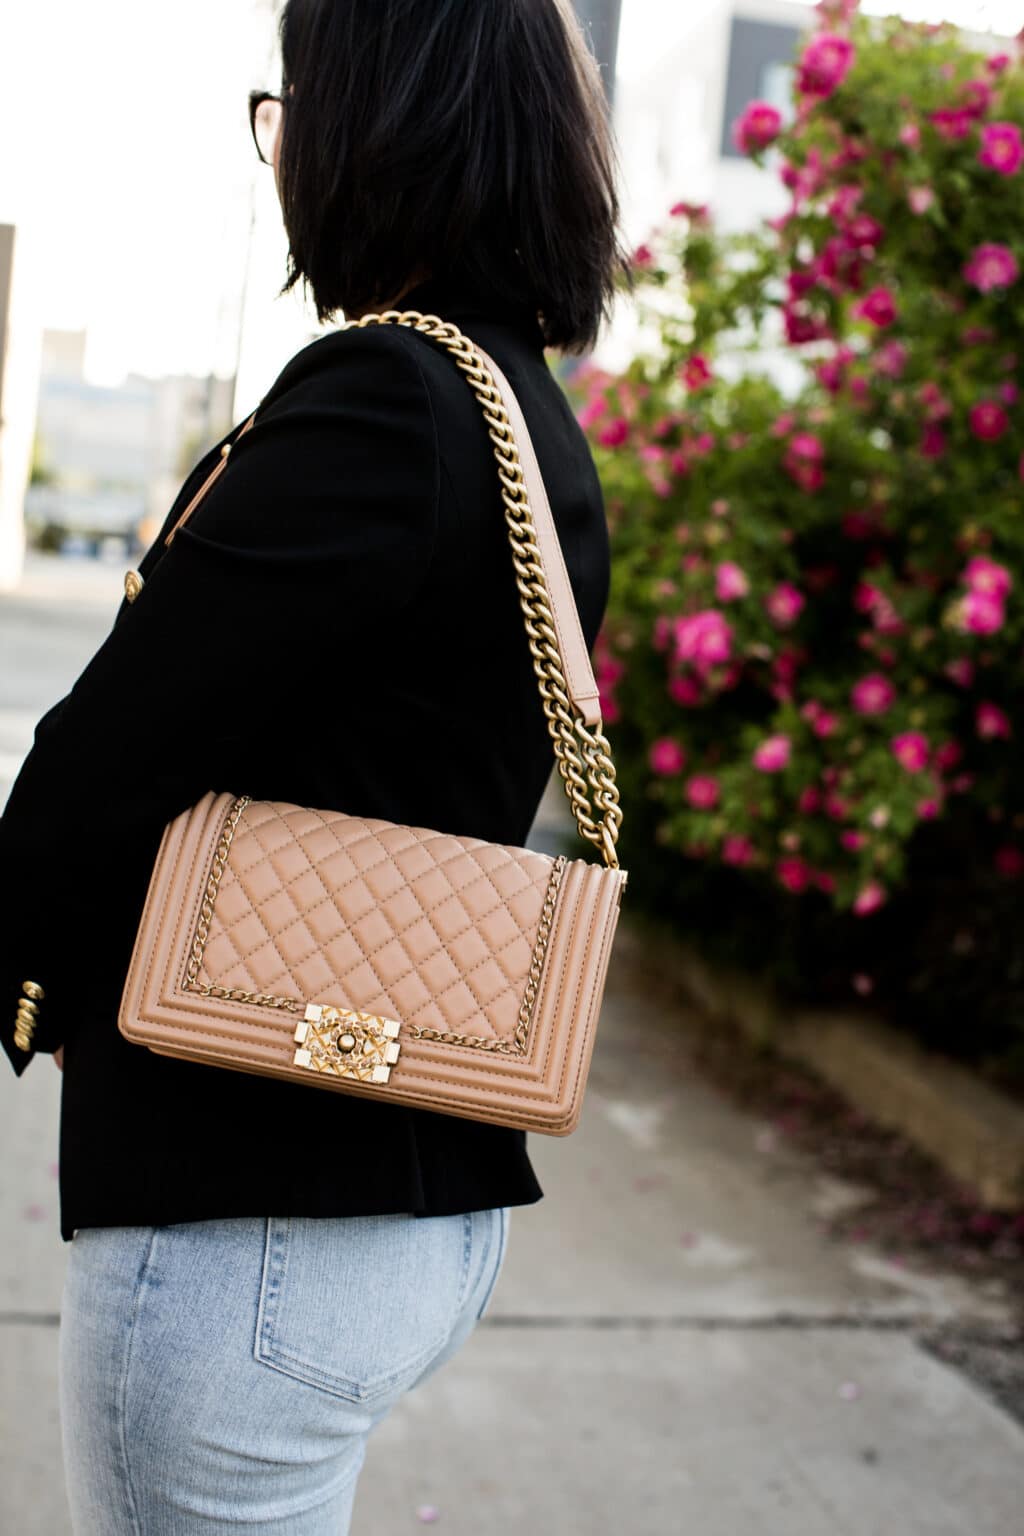 Chanel Boy Bag Review: The Ultimate Guide to the Iconic Fashion